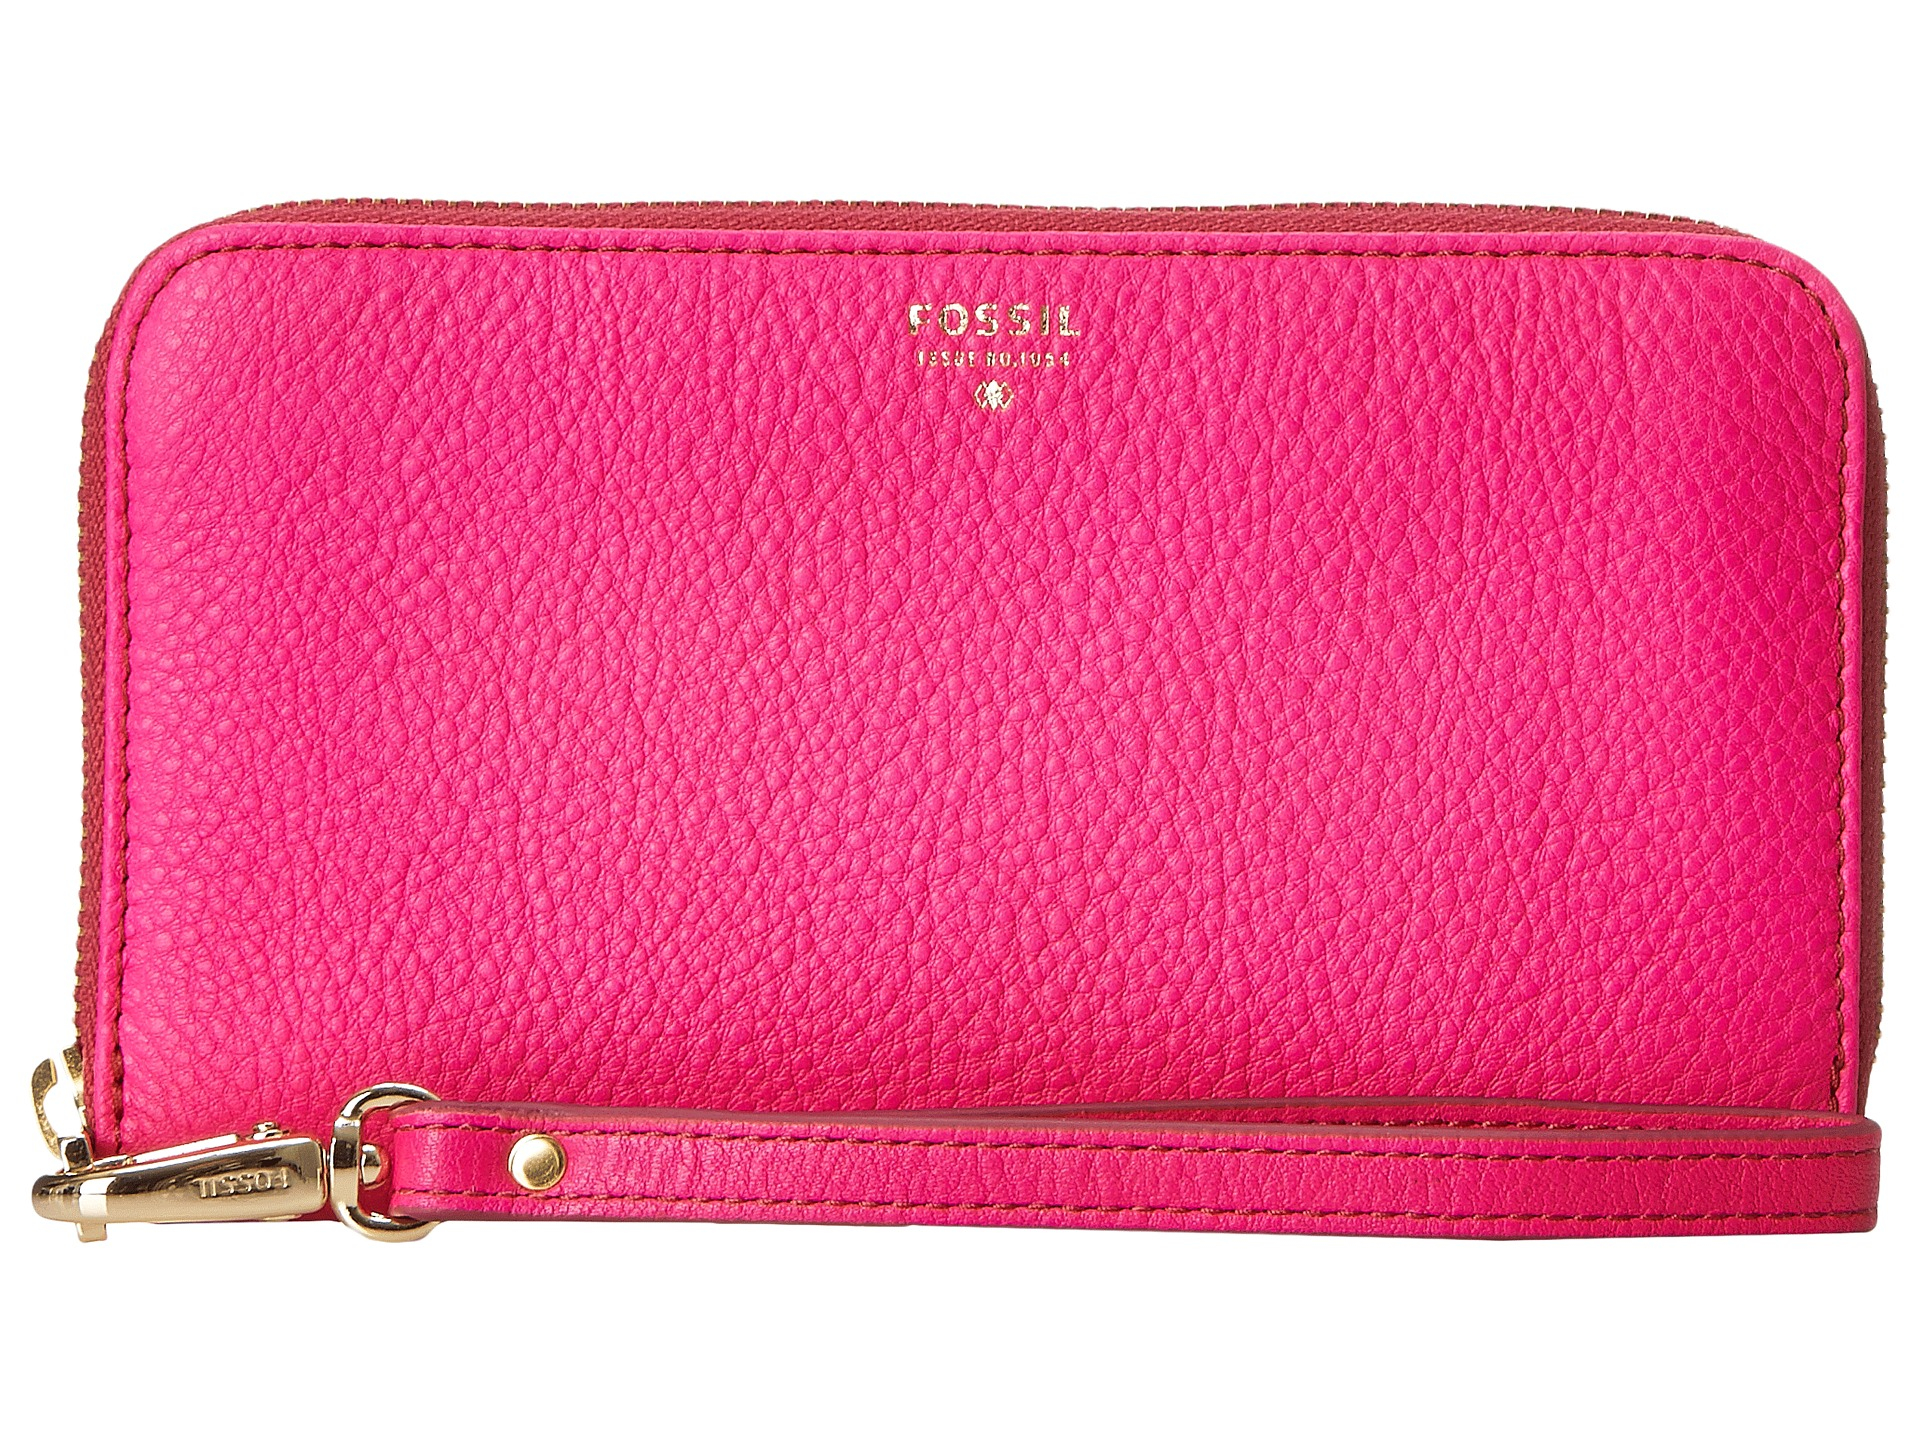 Fossil Sydney Zip Phone Wallet in Pink (Hot Pink) | Lyst